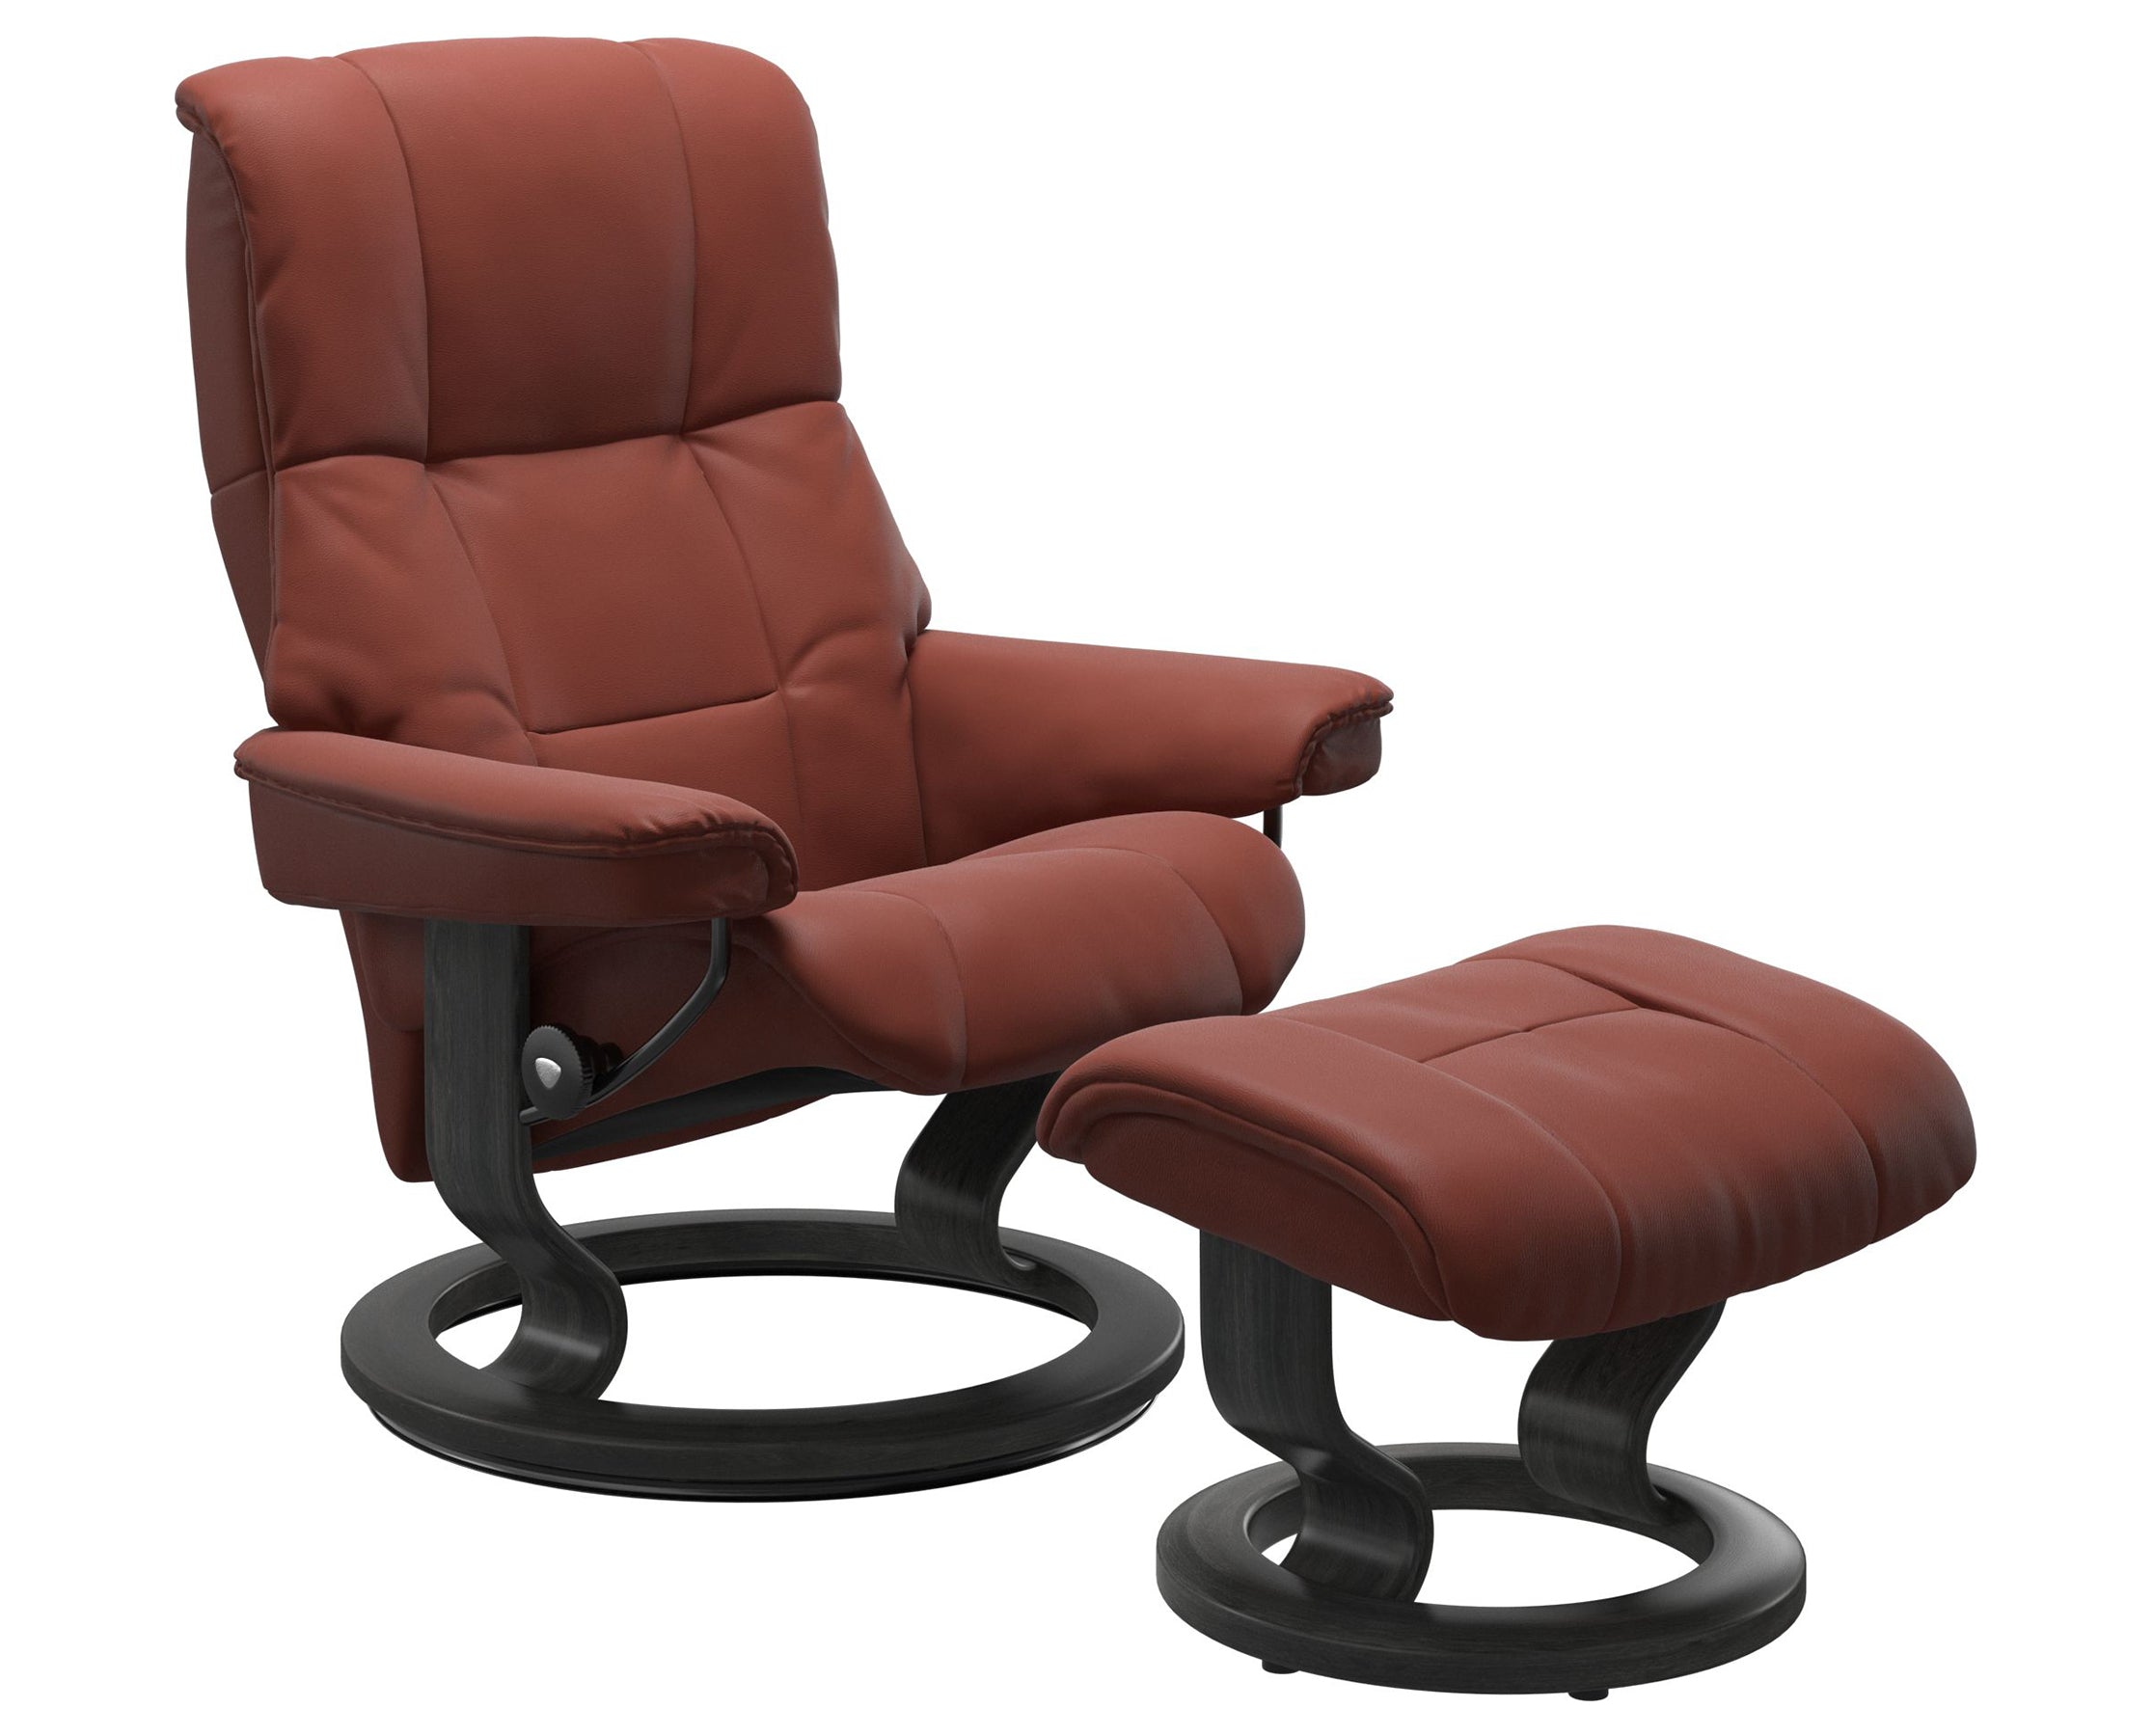 Paloma Leather Dark Henna S/M/L and Grey Base | Stressless Mayfair Classic Recliner | Valley Ridge Furniture